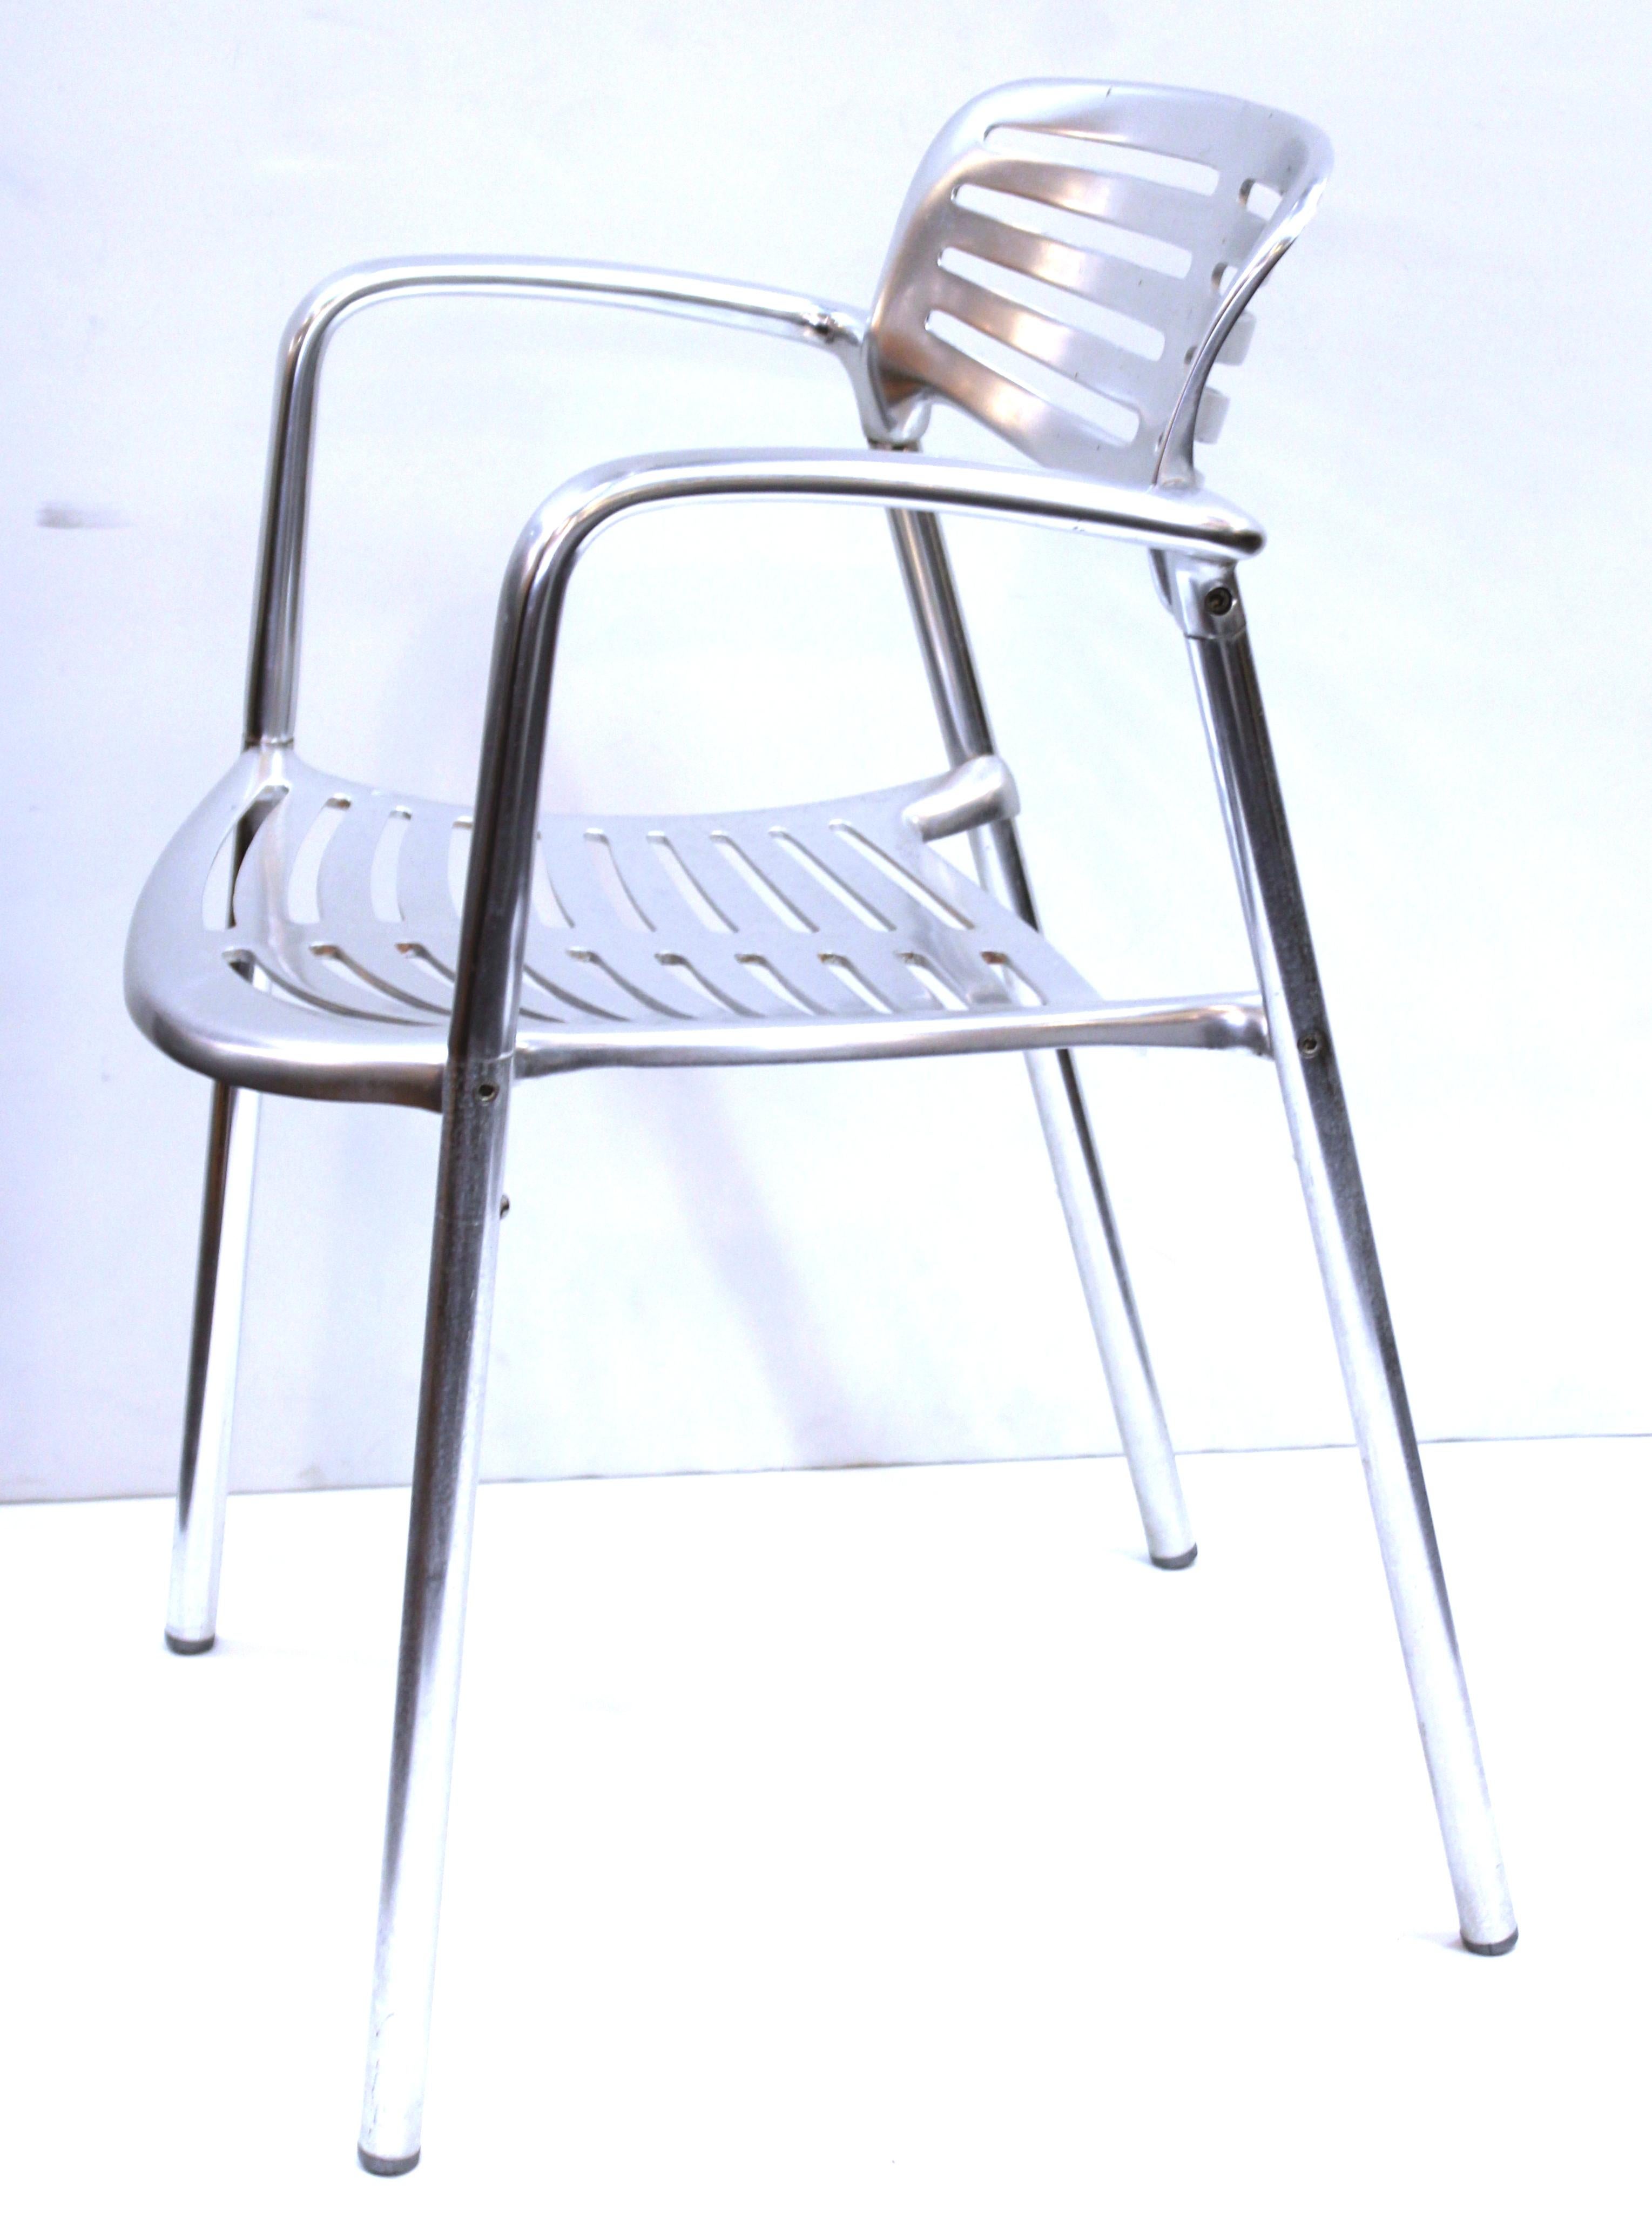 Spanish modern aluminum pair of 'Toledo' armchairs designed by Jorge Pensi for Amat and distributed by Knoll. The chairs can be used indoors as well as outdoors and have a makers mark on the bottom of the seat. Made in the 1980s in Spain. In great